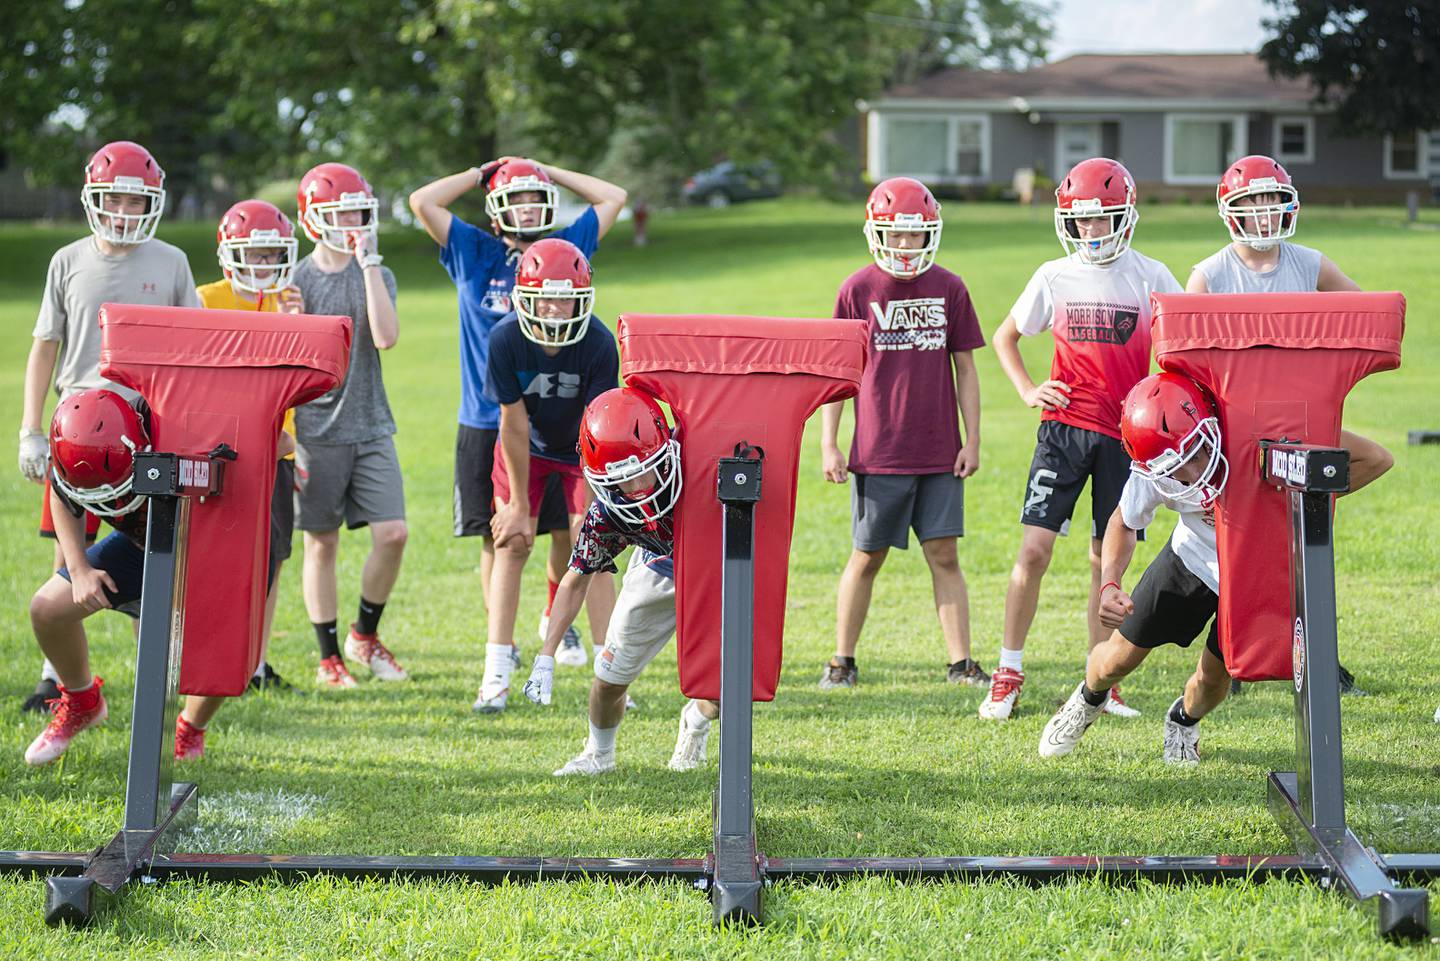 Morrison football players run through drills Tuesday, July 26, 2022. The team will open the season against Newman on August 26.